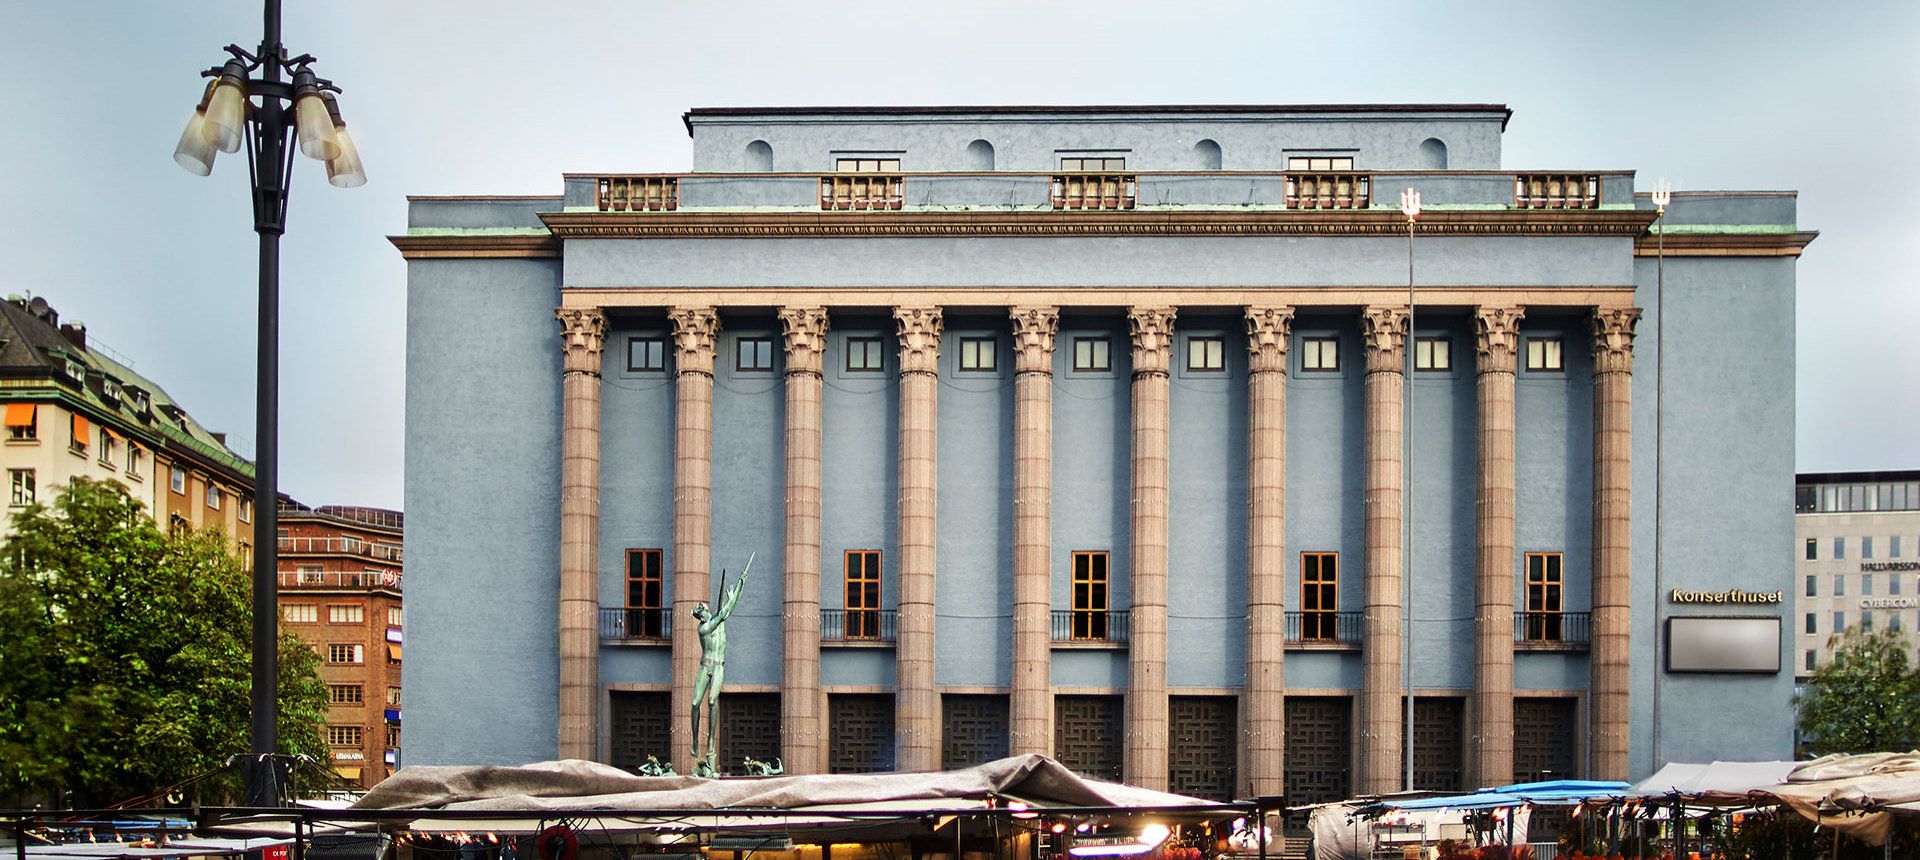 External photo of the Stockholm Concert Hall